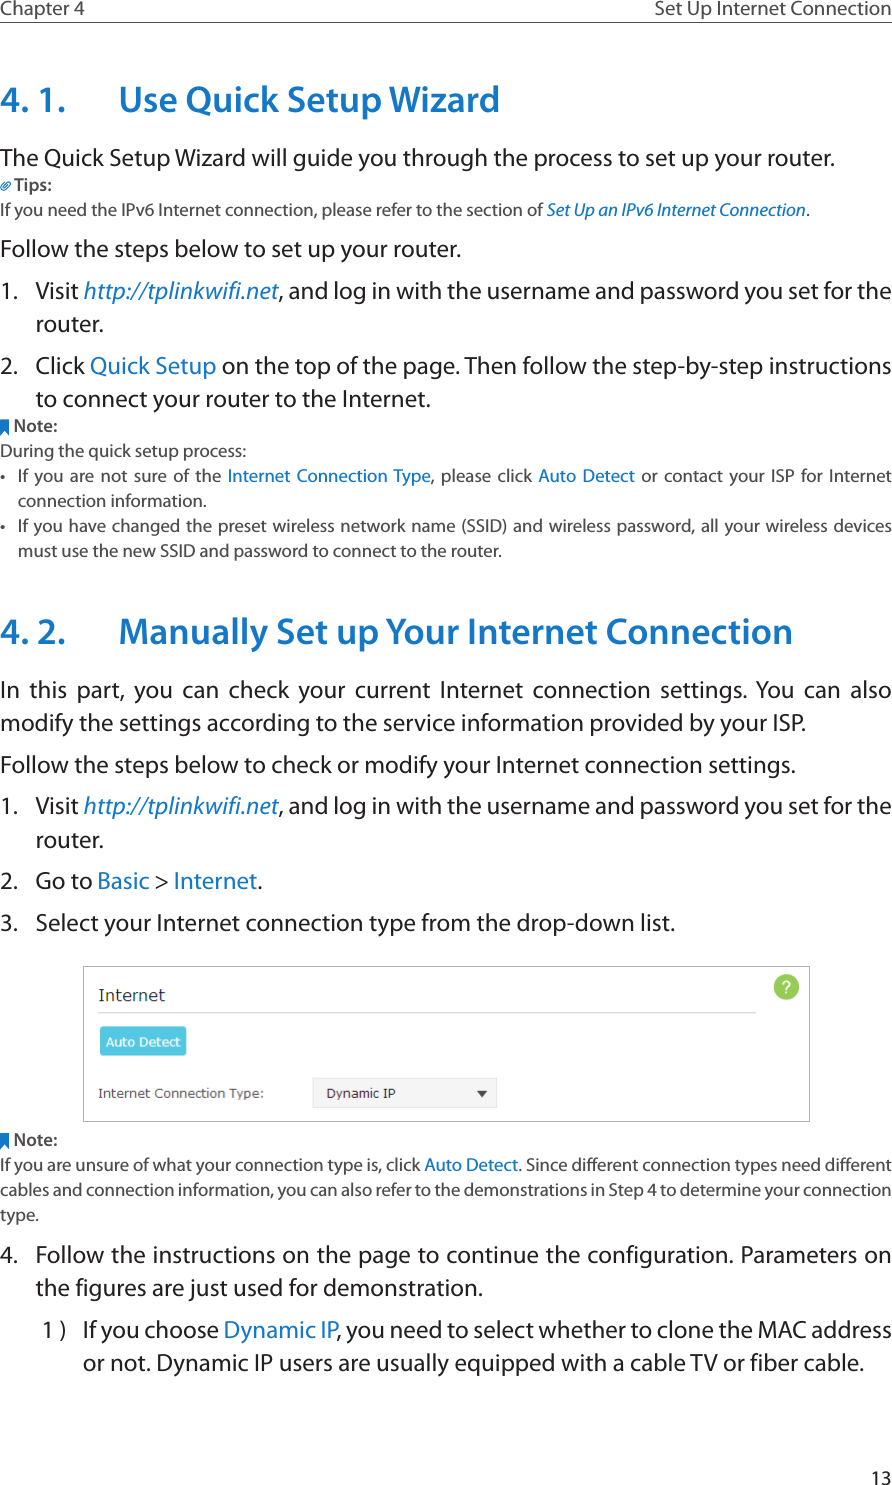 13Chapter 4 Set Up Internet Connection4. 1.  Use Quick Setup WizardThe Quick Setup Wizard will guide you through the process to set up your router.Tips:If you need the IPv6 Internet connection, please refer to the section of Set Up an IPv6 Internet Connection.Follow the steps below to set up your router.1.  Visit http://tplinkwifi.net, and log in with the username and password you set for the router.2.  Click Quick Setup on the top of the page. Then follow the step-by-step instructions to connect your router to the Internet.Note:During the quick setup process:•  If you are not sure of the Internet Connection Type, please click Auto Detect or contact your ISP for Internet connection information.•  If you have changed the preset wireless network name (SSID) and wireless password, all your wireless devices must use the new SSID and password to connect to the router.4. 2.  Manually Set up Your Internet Connection In this part, you can check your current Internet connection settings. You can also modify the settings according to the service information provided by your ISP.Follow the steps below to check or modify your Internet connection settings.1.  Visit http://tplinkwifi.net, and log in with the username and password you set for the router.2.  Go to Basic &gt; Internet.3.  Select your Internet connection type from the drop-down list. Note:If you are unsure of what your connection type is, click Auto Detect. Since different connection types need different cables and connection information, you can also refer to the demonstrations in Step 4 to determine your connection type.4.  Follow the instructions on the page to continue the configuration. Parameters on the figures are just used for demonstration. 1 )  If you choose Dynamic IP, you need to select whether to clone the MAC address or not. Dynamic IP users are usually equipped with a cable TV or fiber cable.